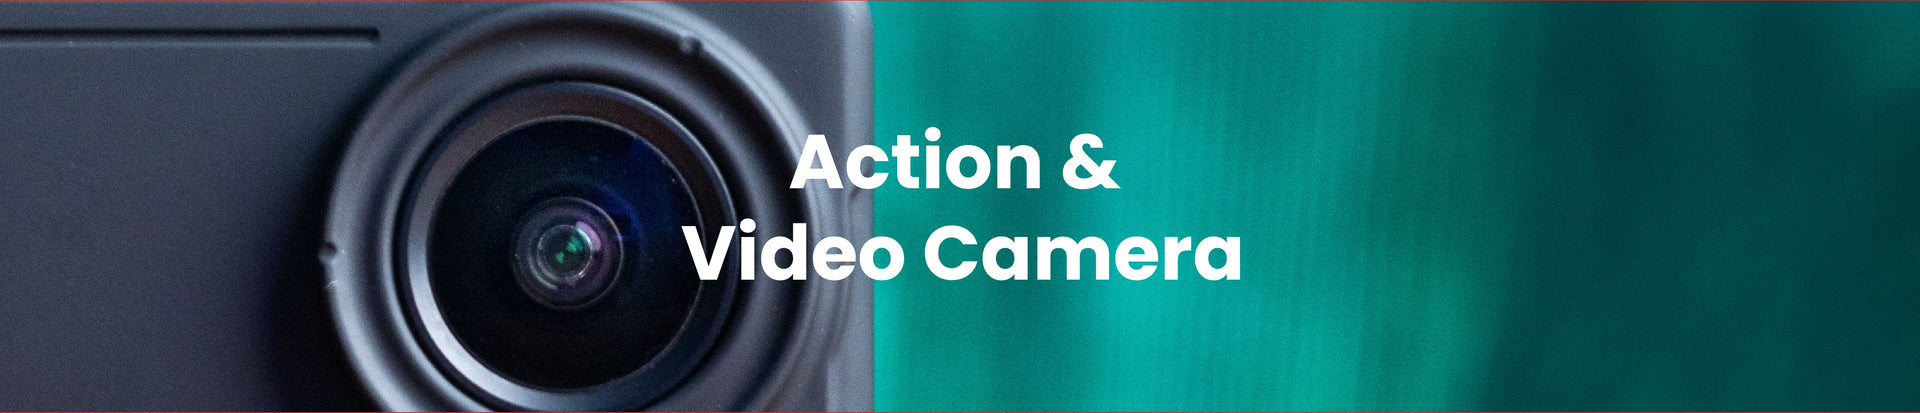 Action & Video Camera